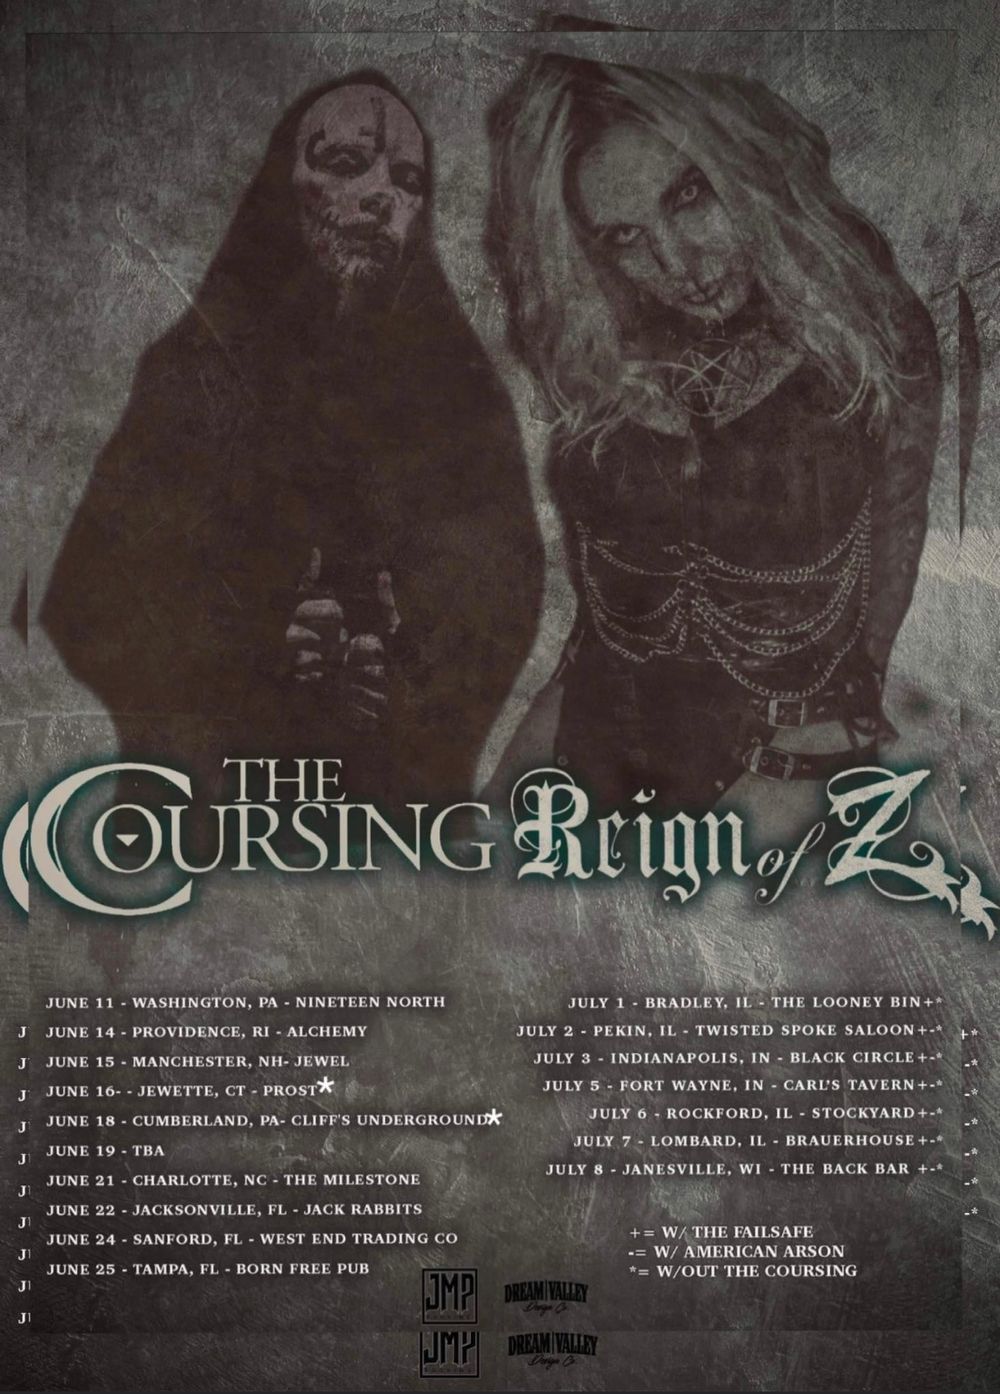 Reign of Z / The Coursing Tour 